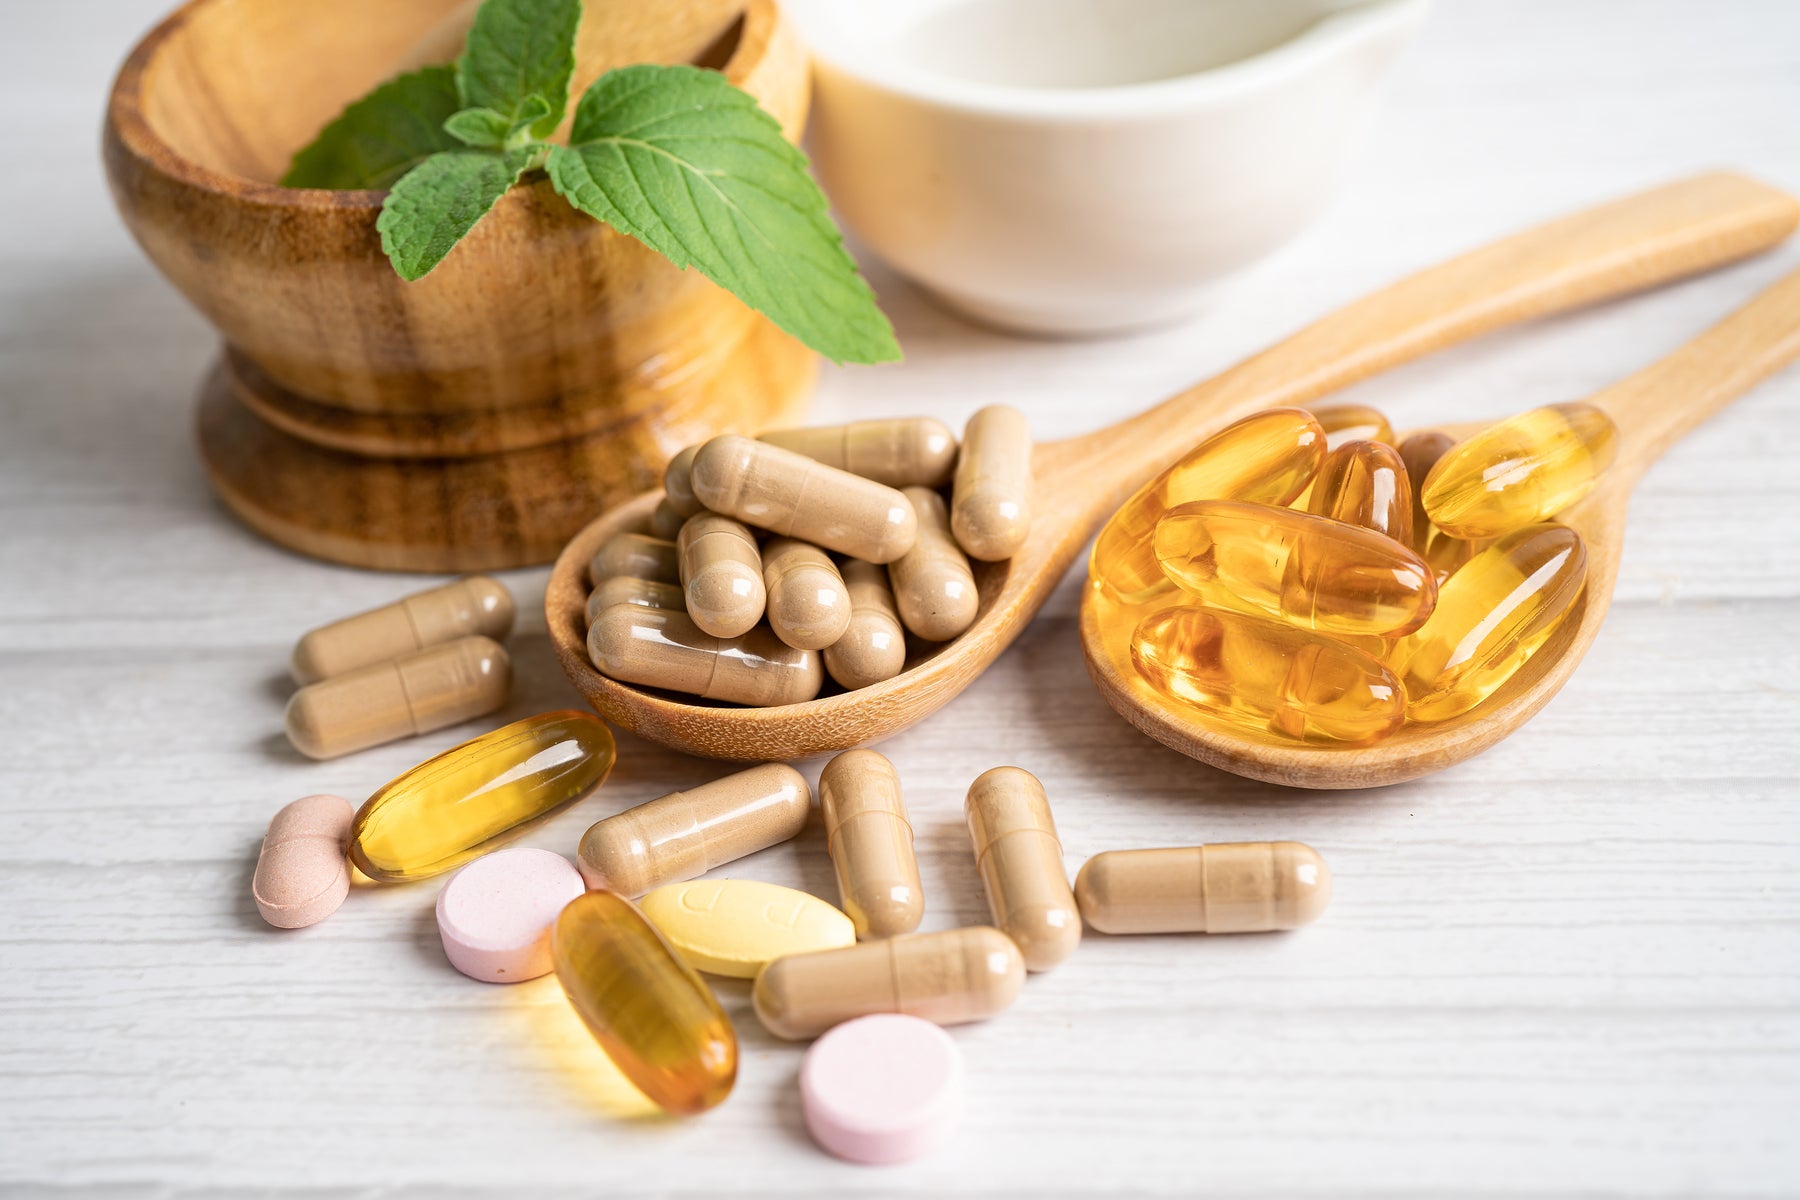 8 Ways to Make Your Vitamins and Supplements More Effective